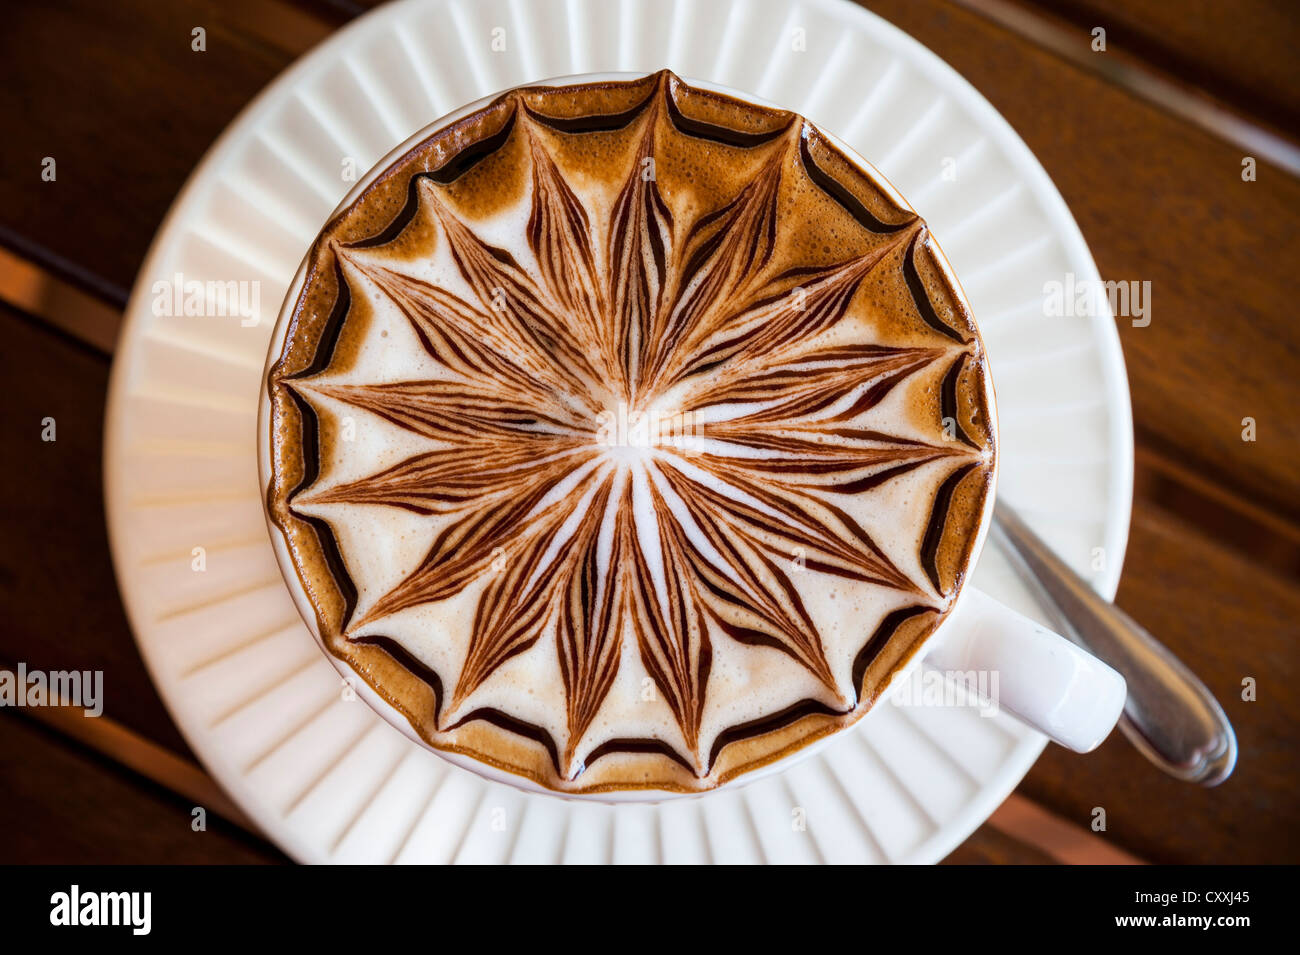 Artistically decorated cappuccino, cup from above Stock Photo